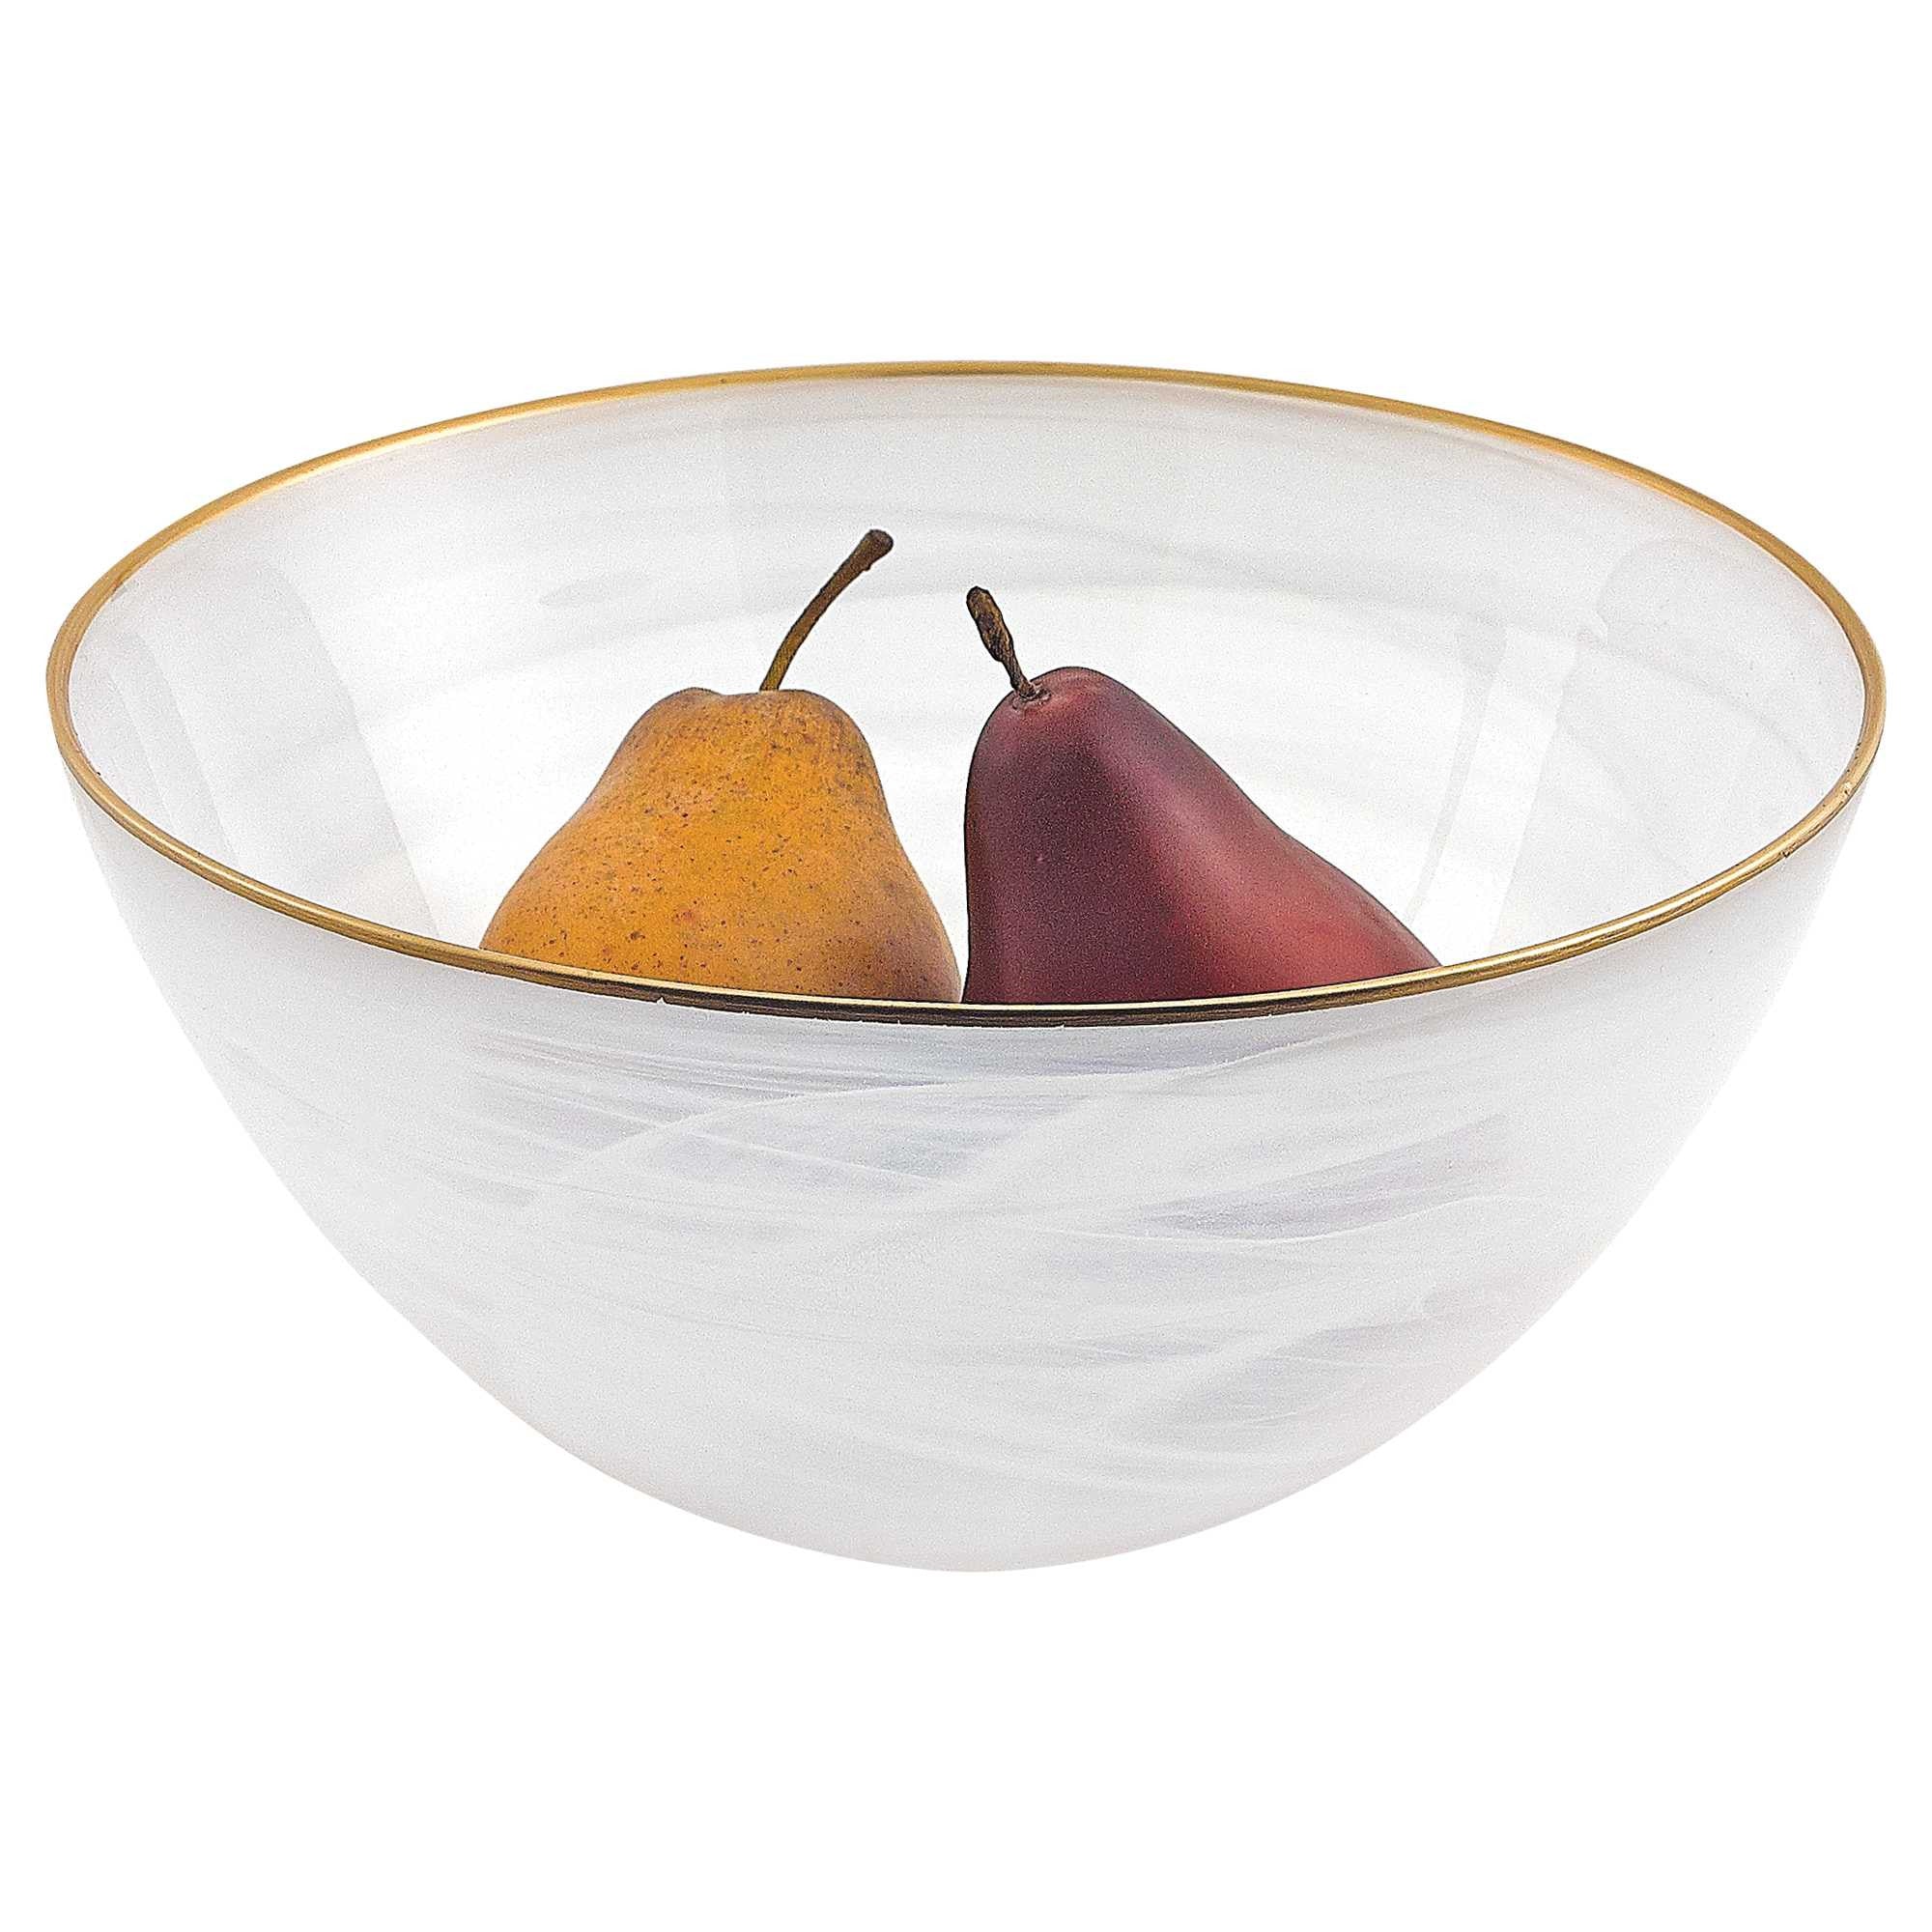 10 Hand Crafted White Gold Glass Fruit Or Salad Bowl With Gold Rim